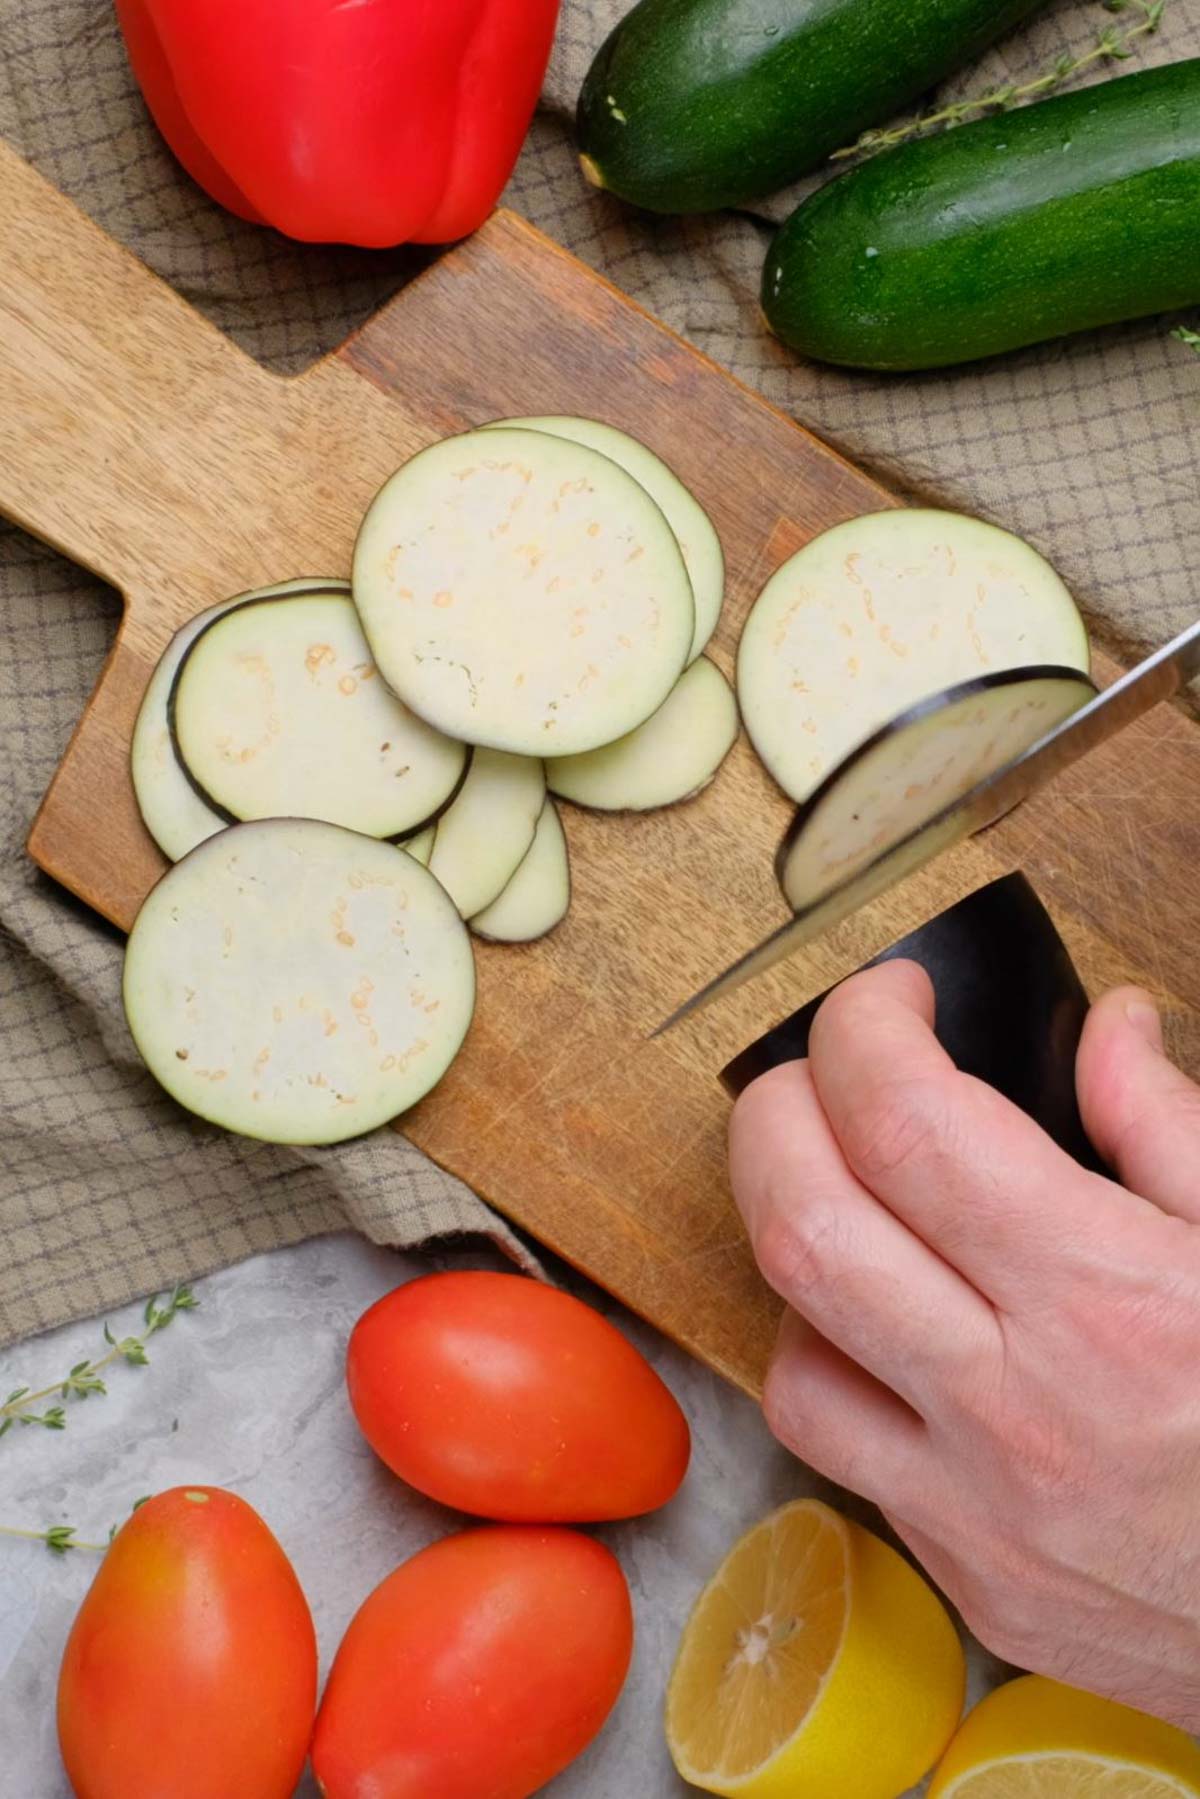 Vegetables being sliced on a wooden countertop.